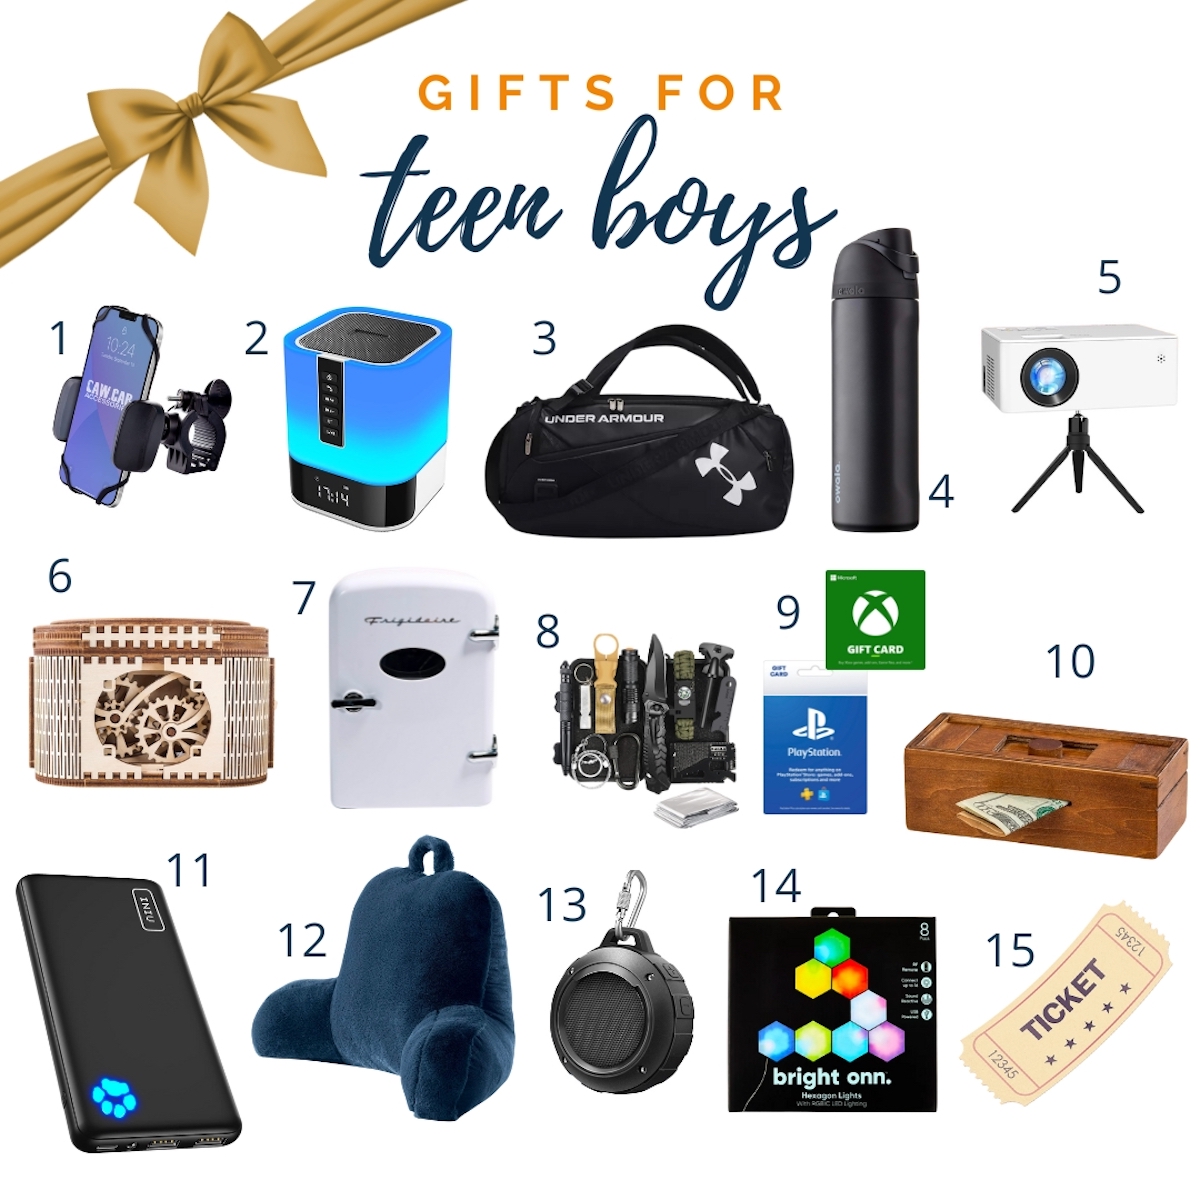 10 Gift ideas even hard to please 18-year-old boys will love